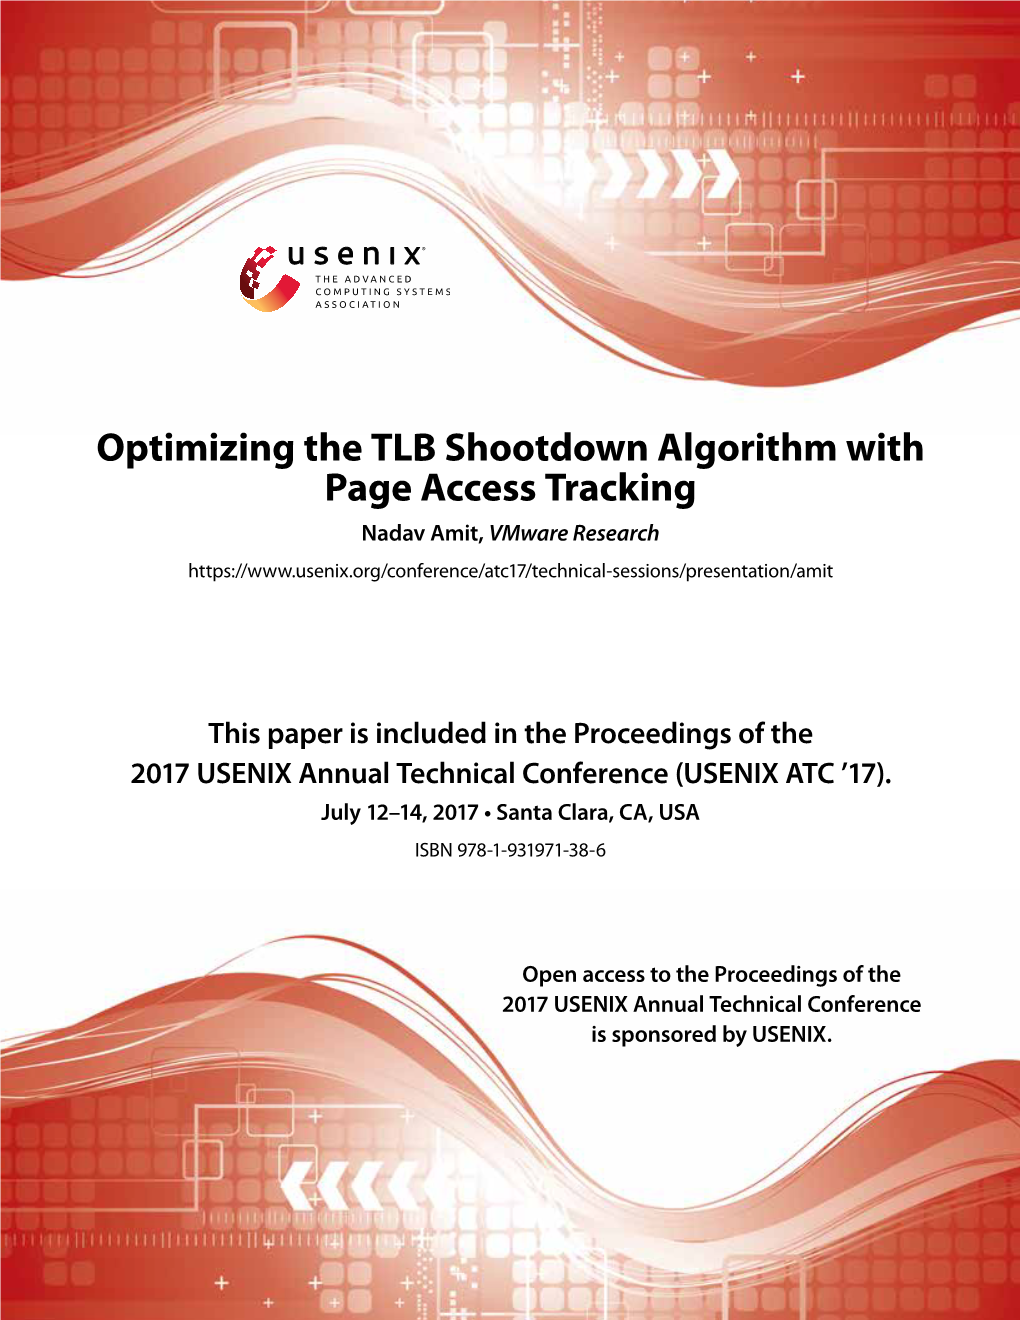 Optimizing the TLB Shootdown Algorithm with Page Access Tracking